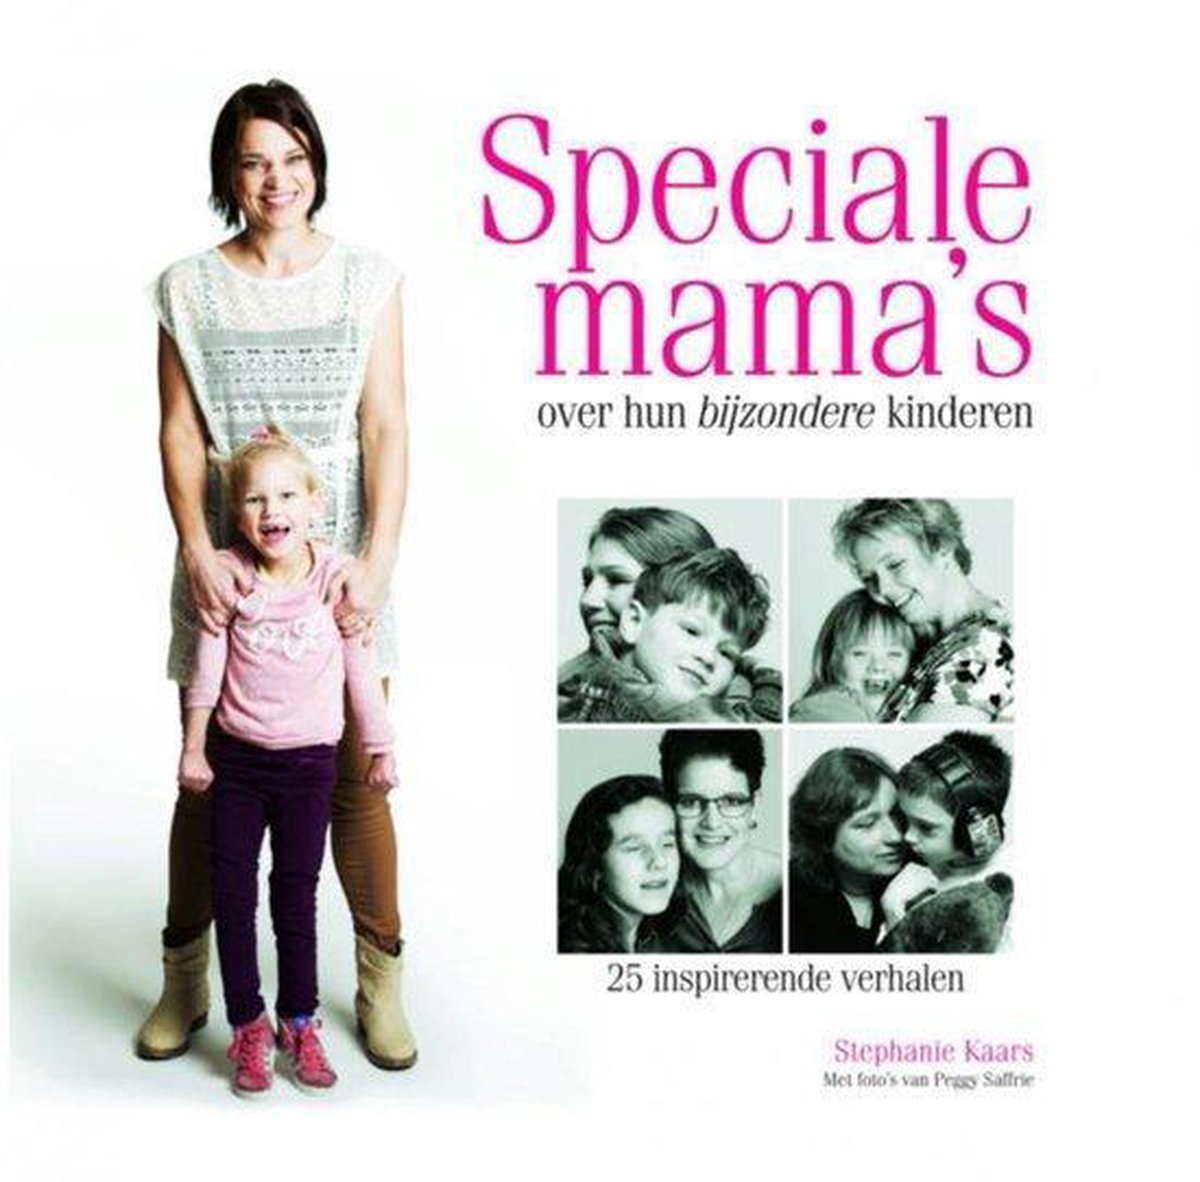 Speciale mama's